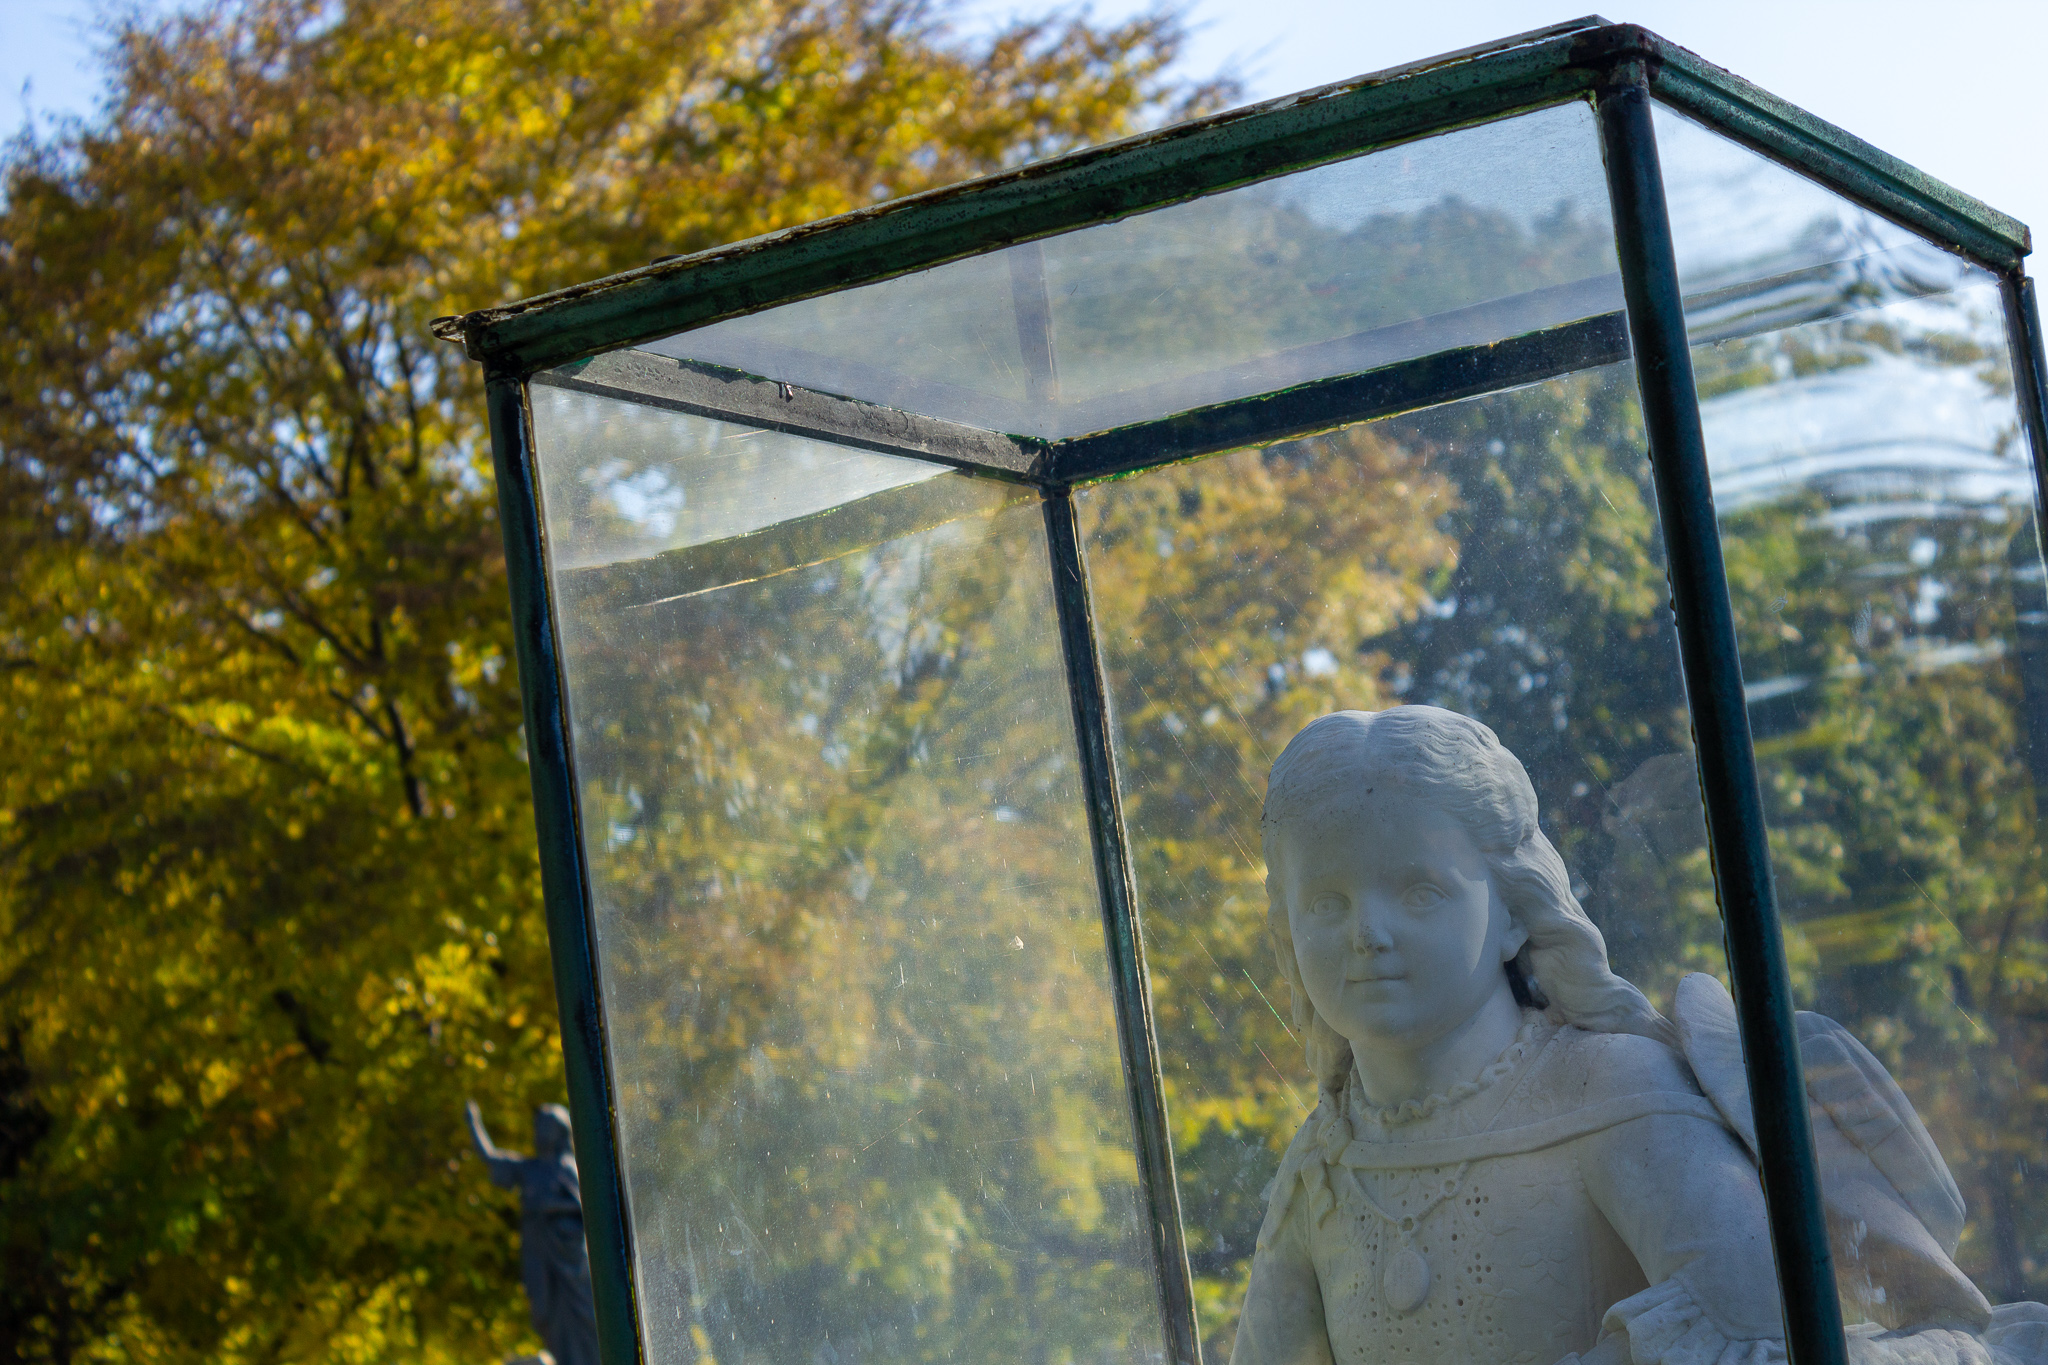 The stone figure of a young girl smiles through a glass box with yellow trees in the background